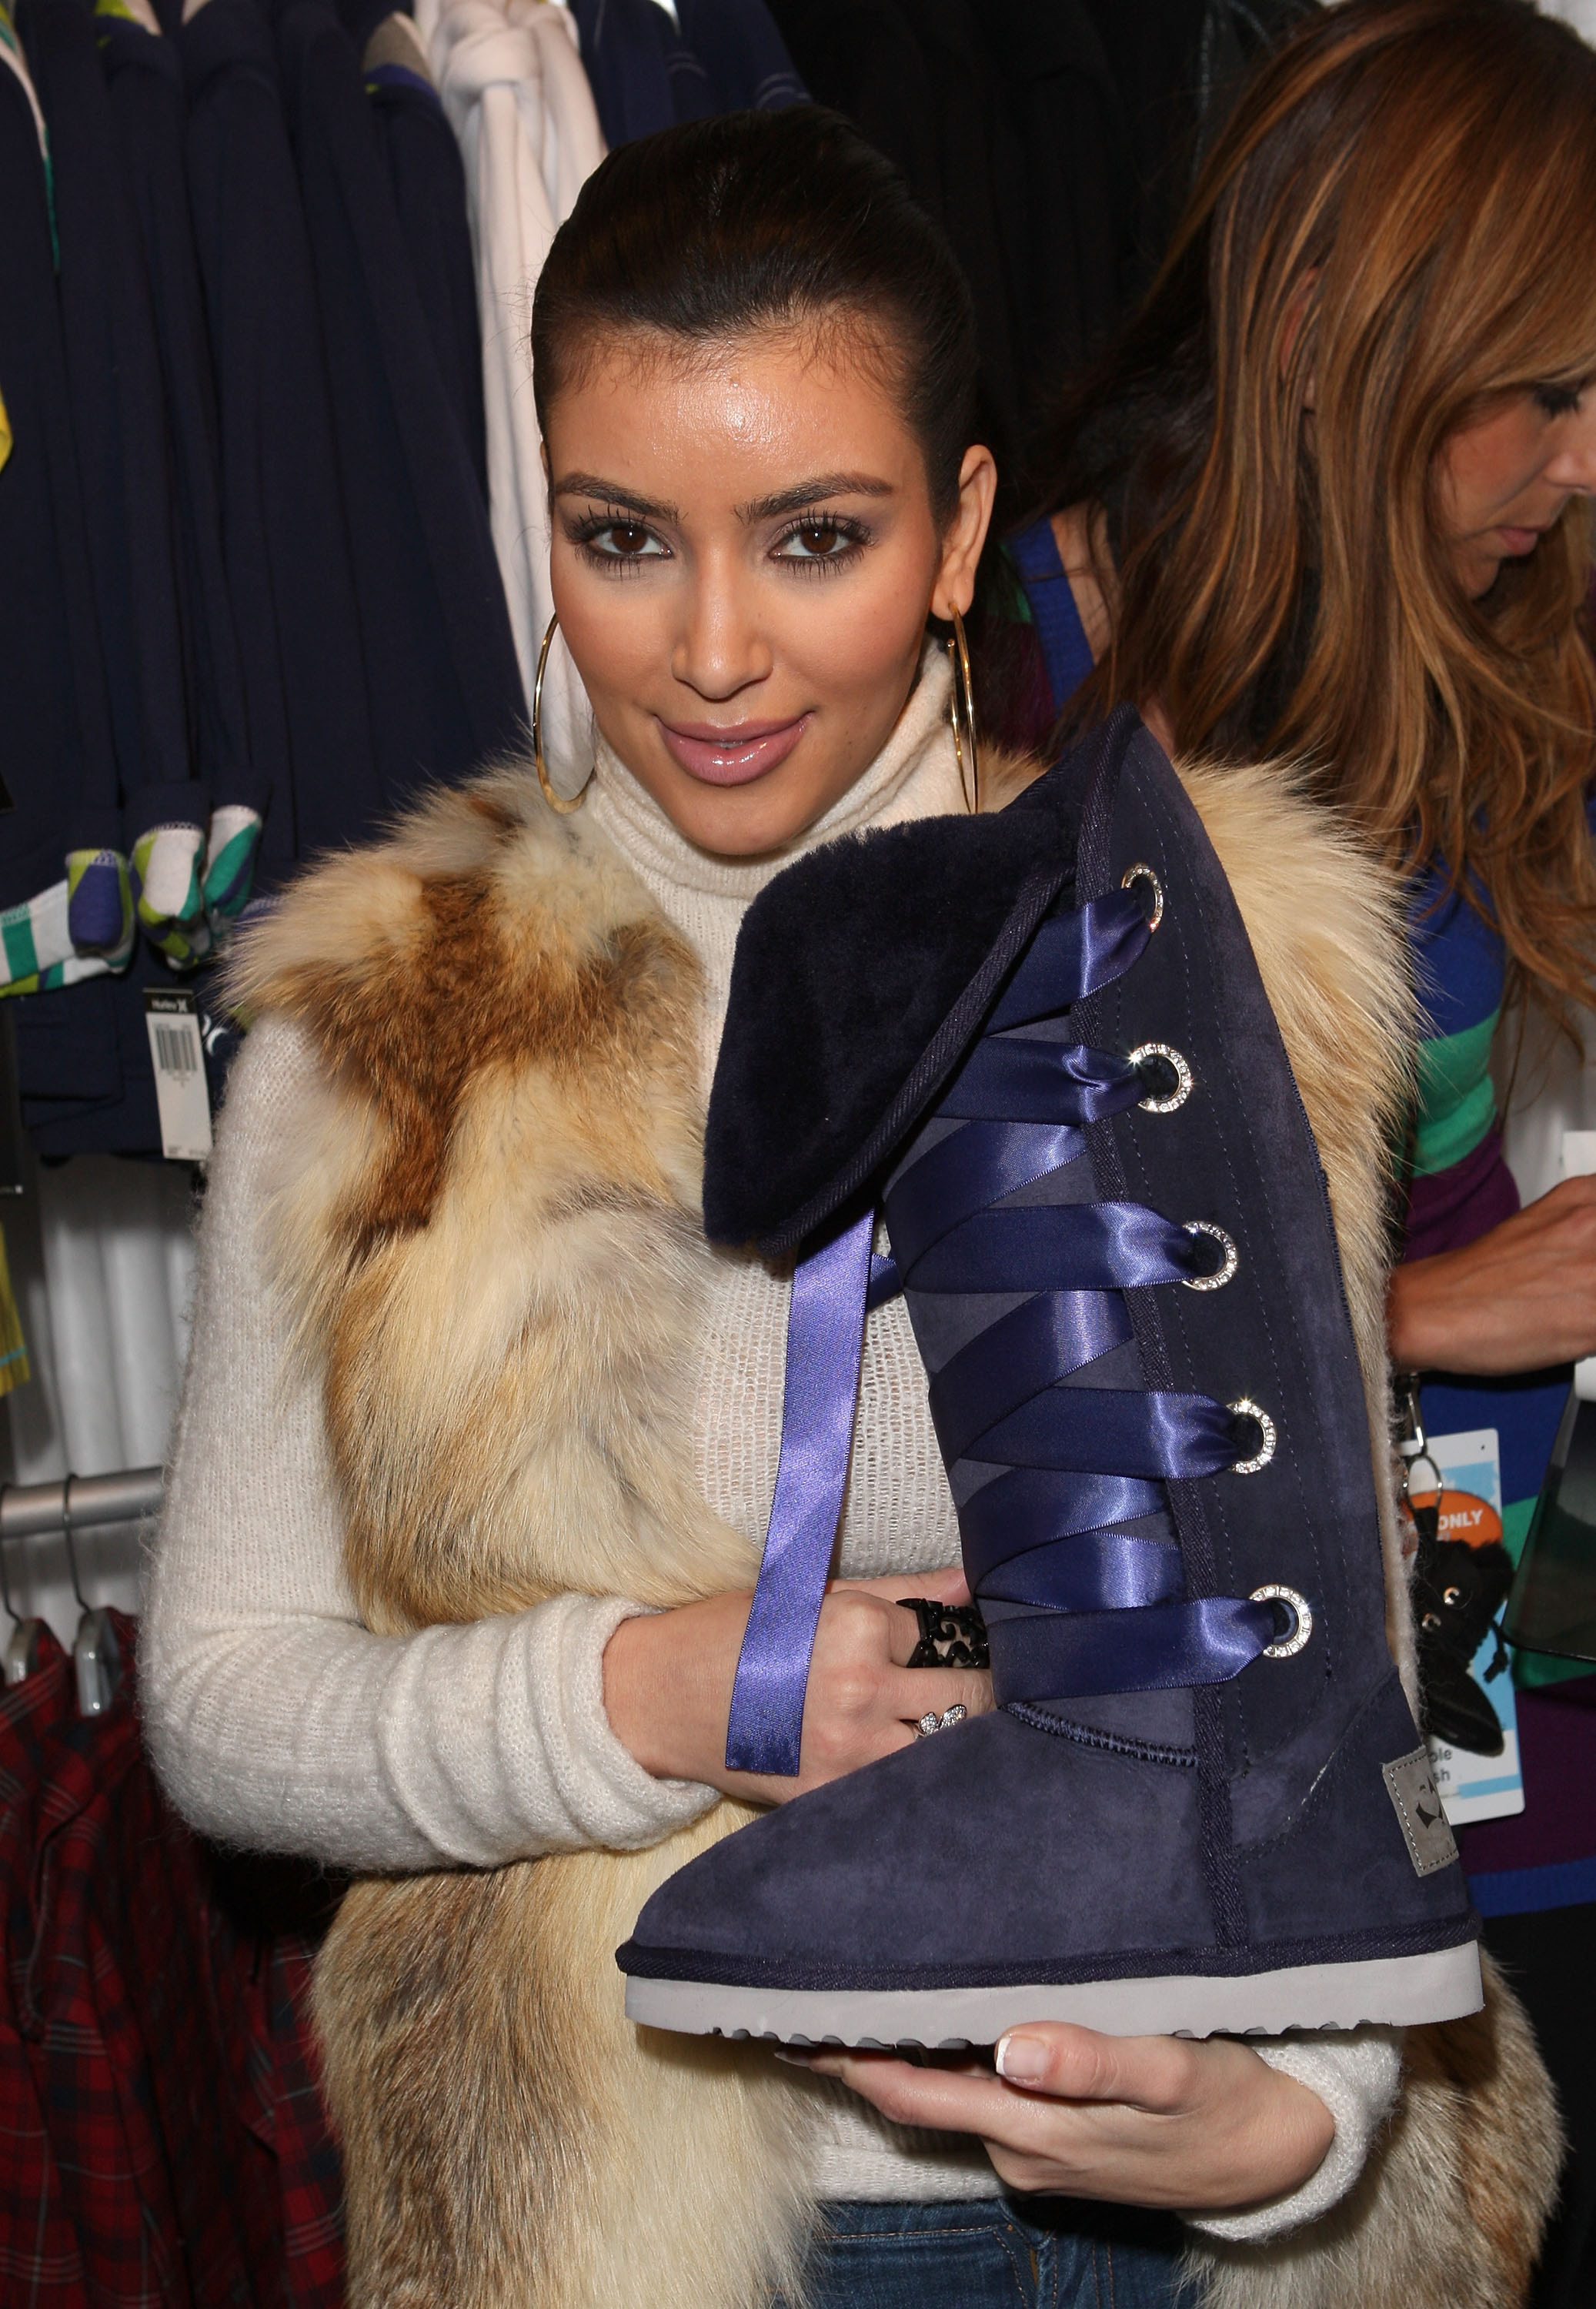 Kim holding an Ugg-type boot with ribbon laces